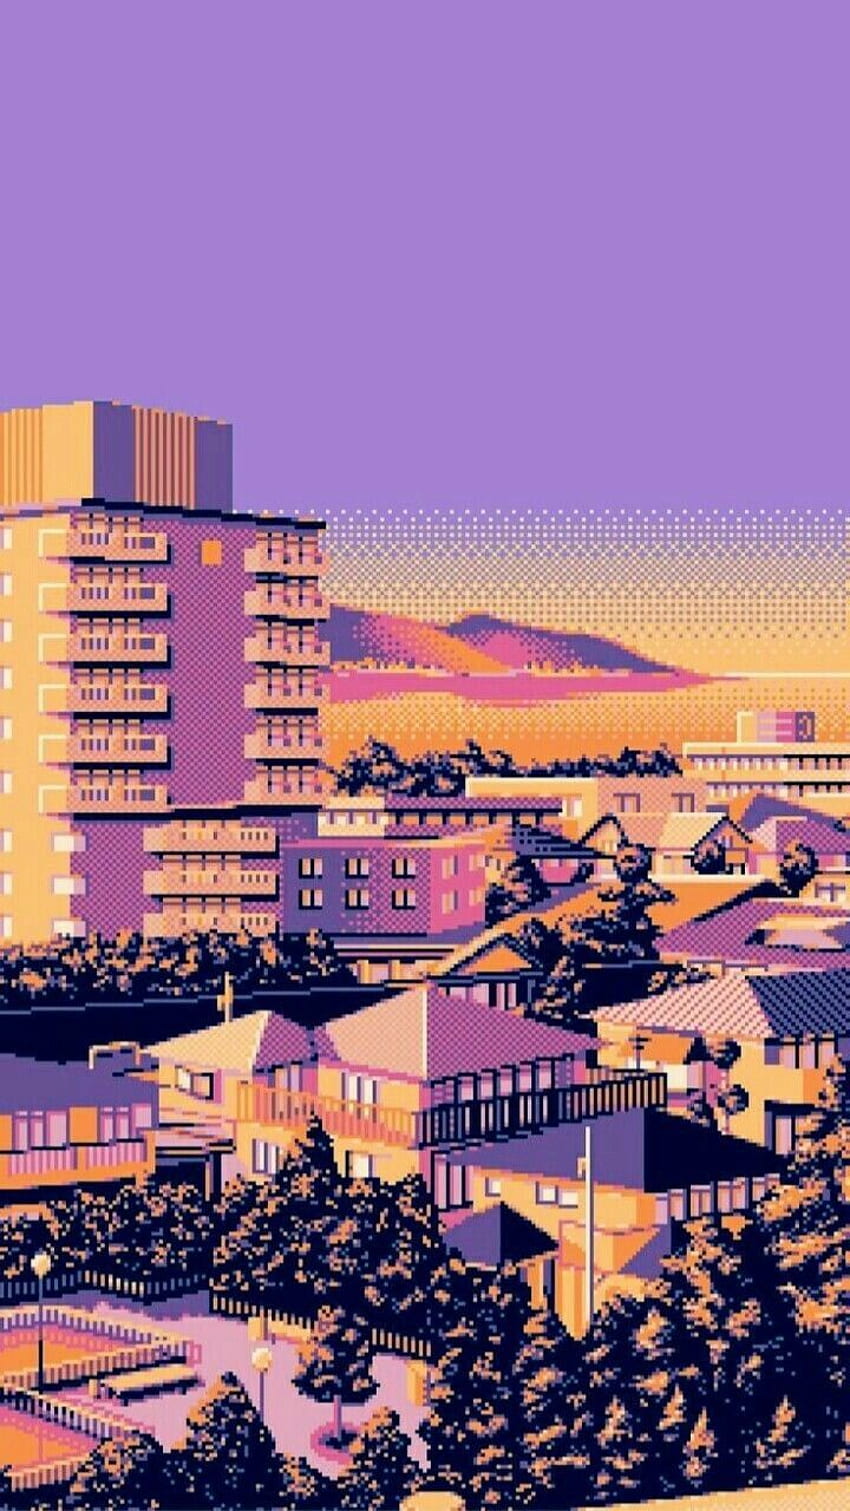 A digital painting of the city at sunset - Pixel art